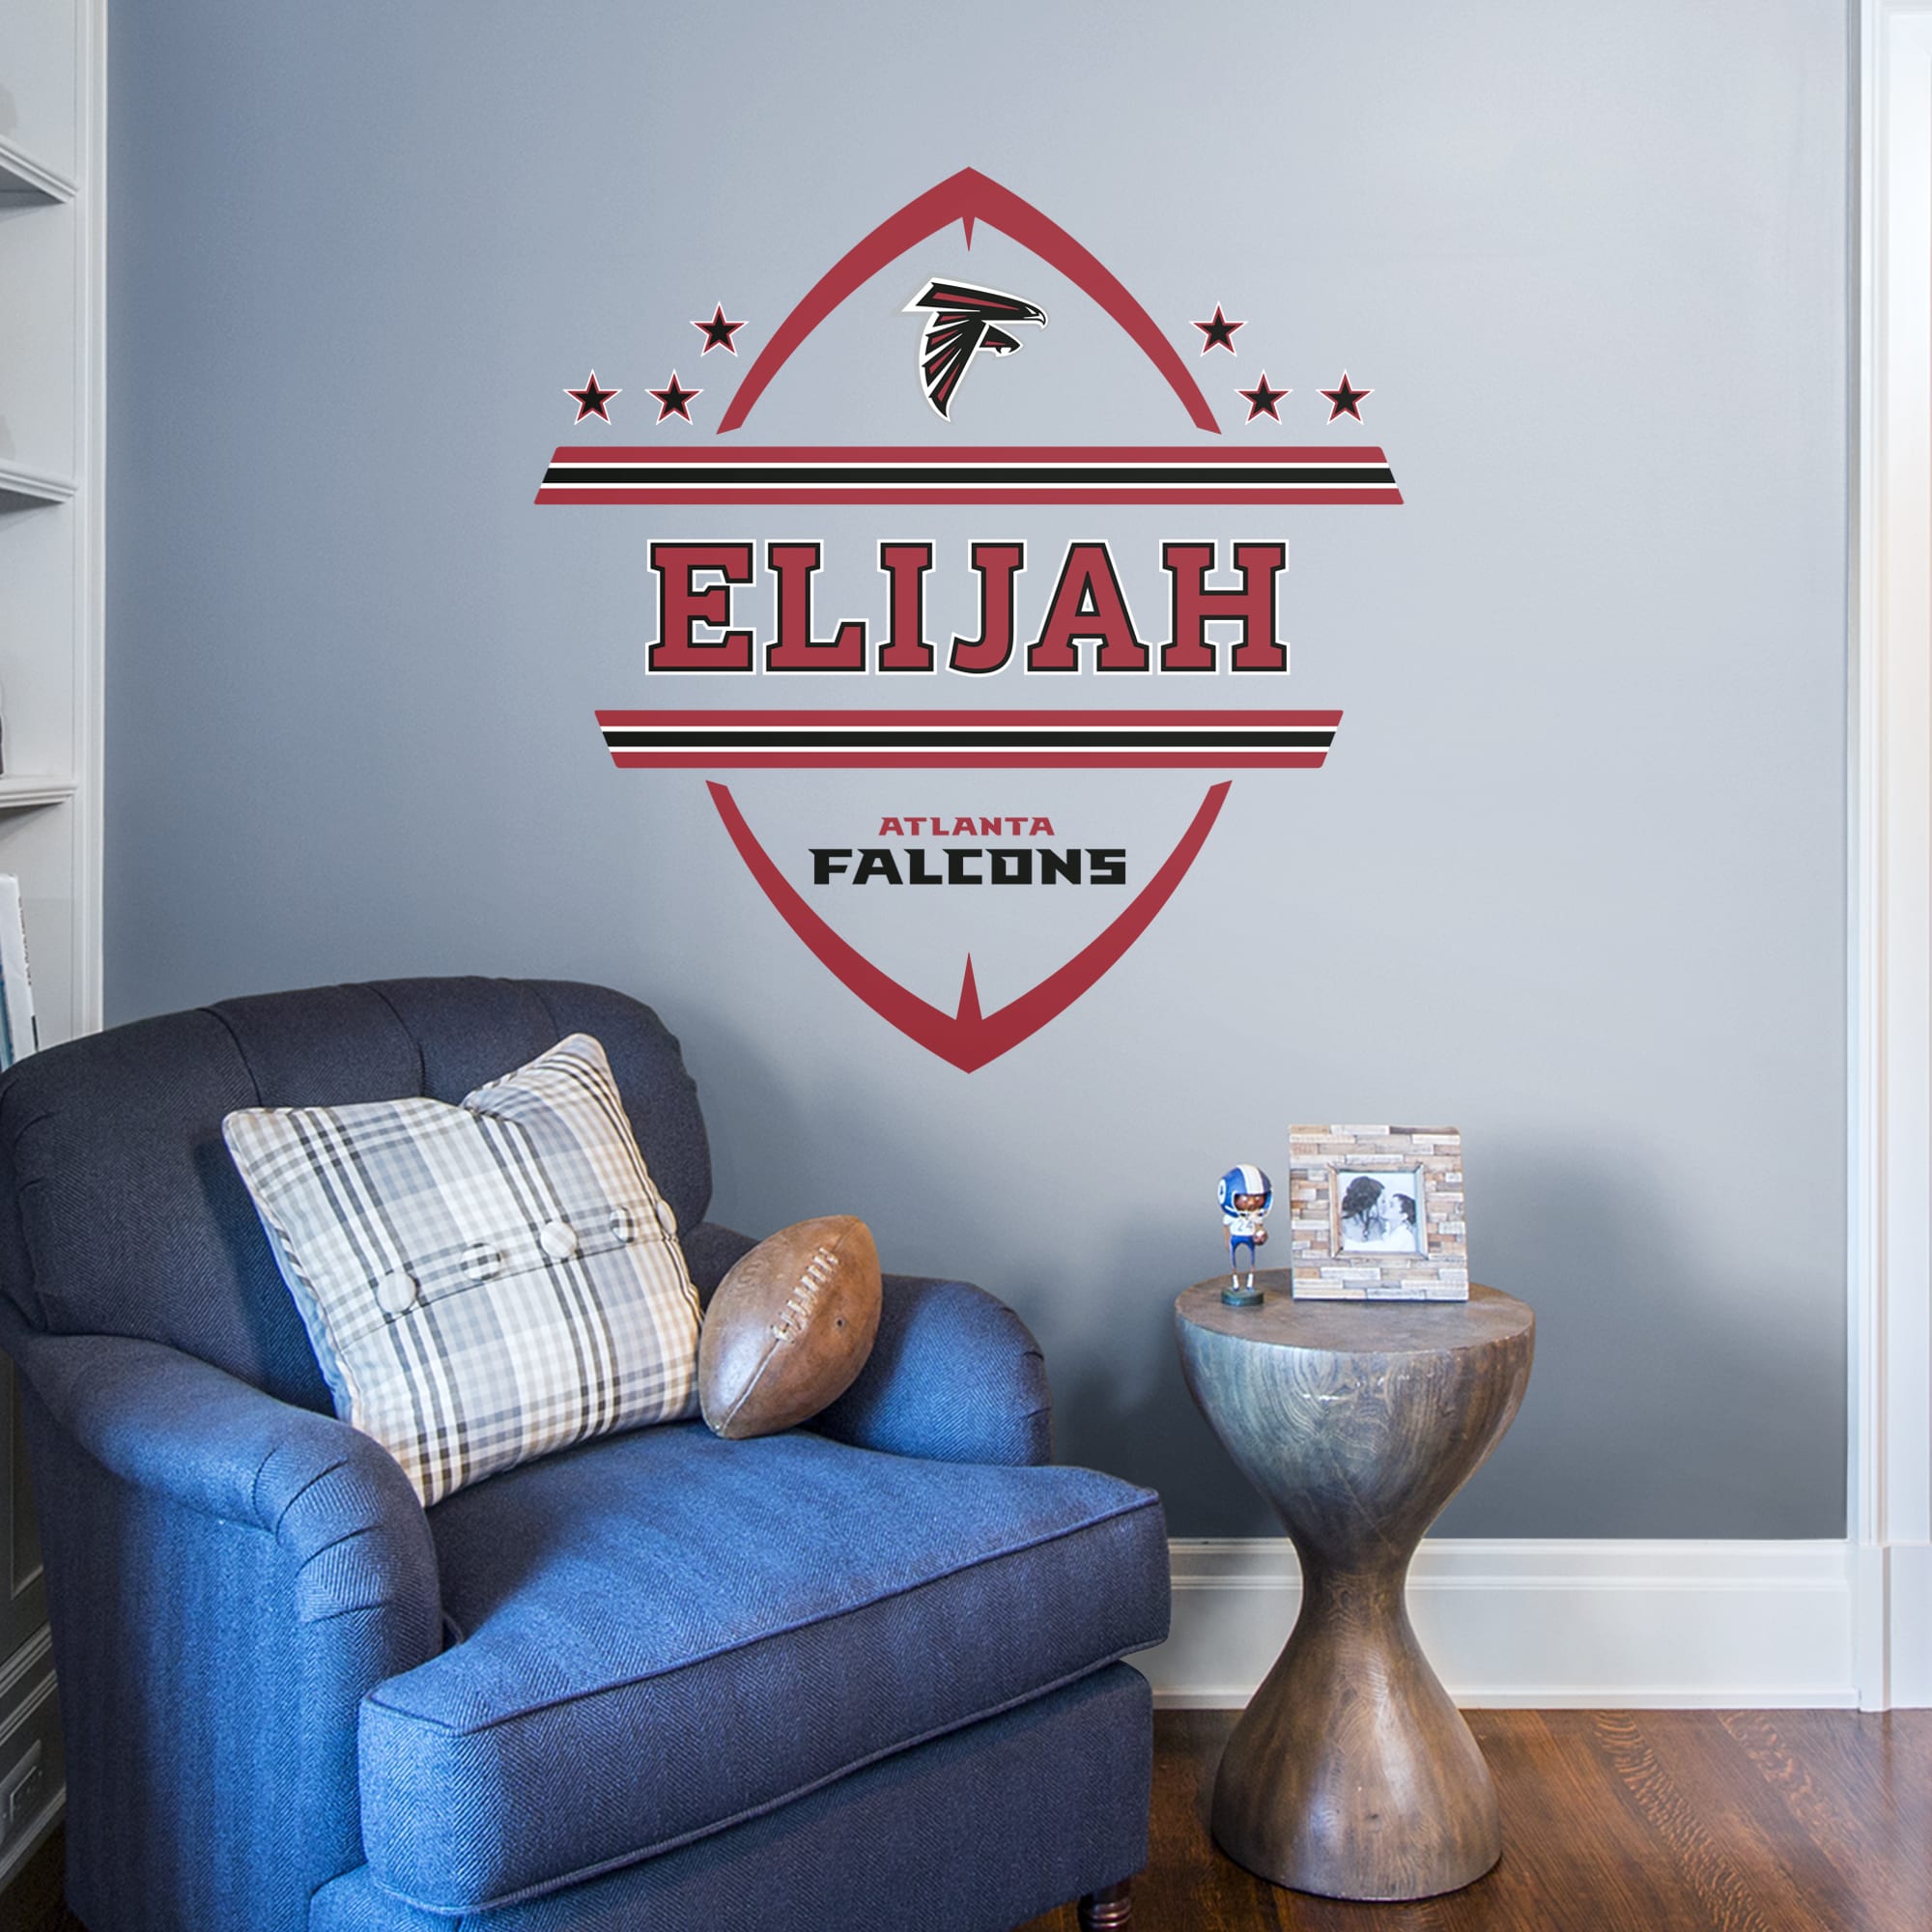 Atlanta Falcons: Personalized Name - Officially Licensed NFL Transfer Decal by Fathead | Vinyl